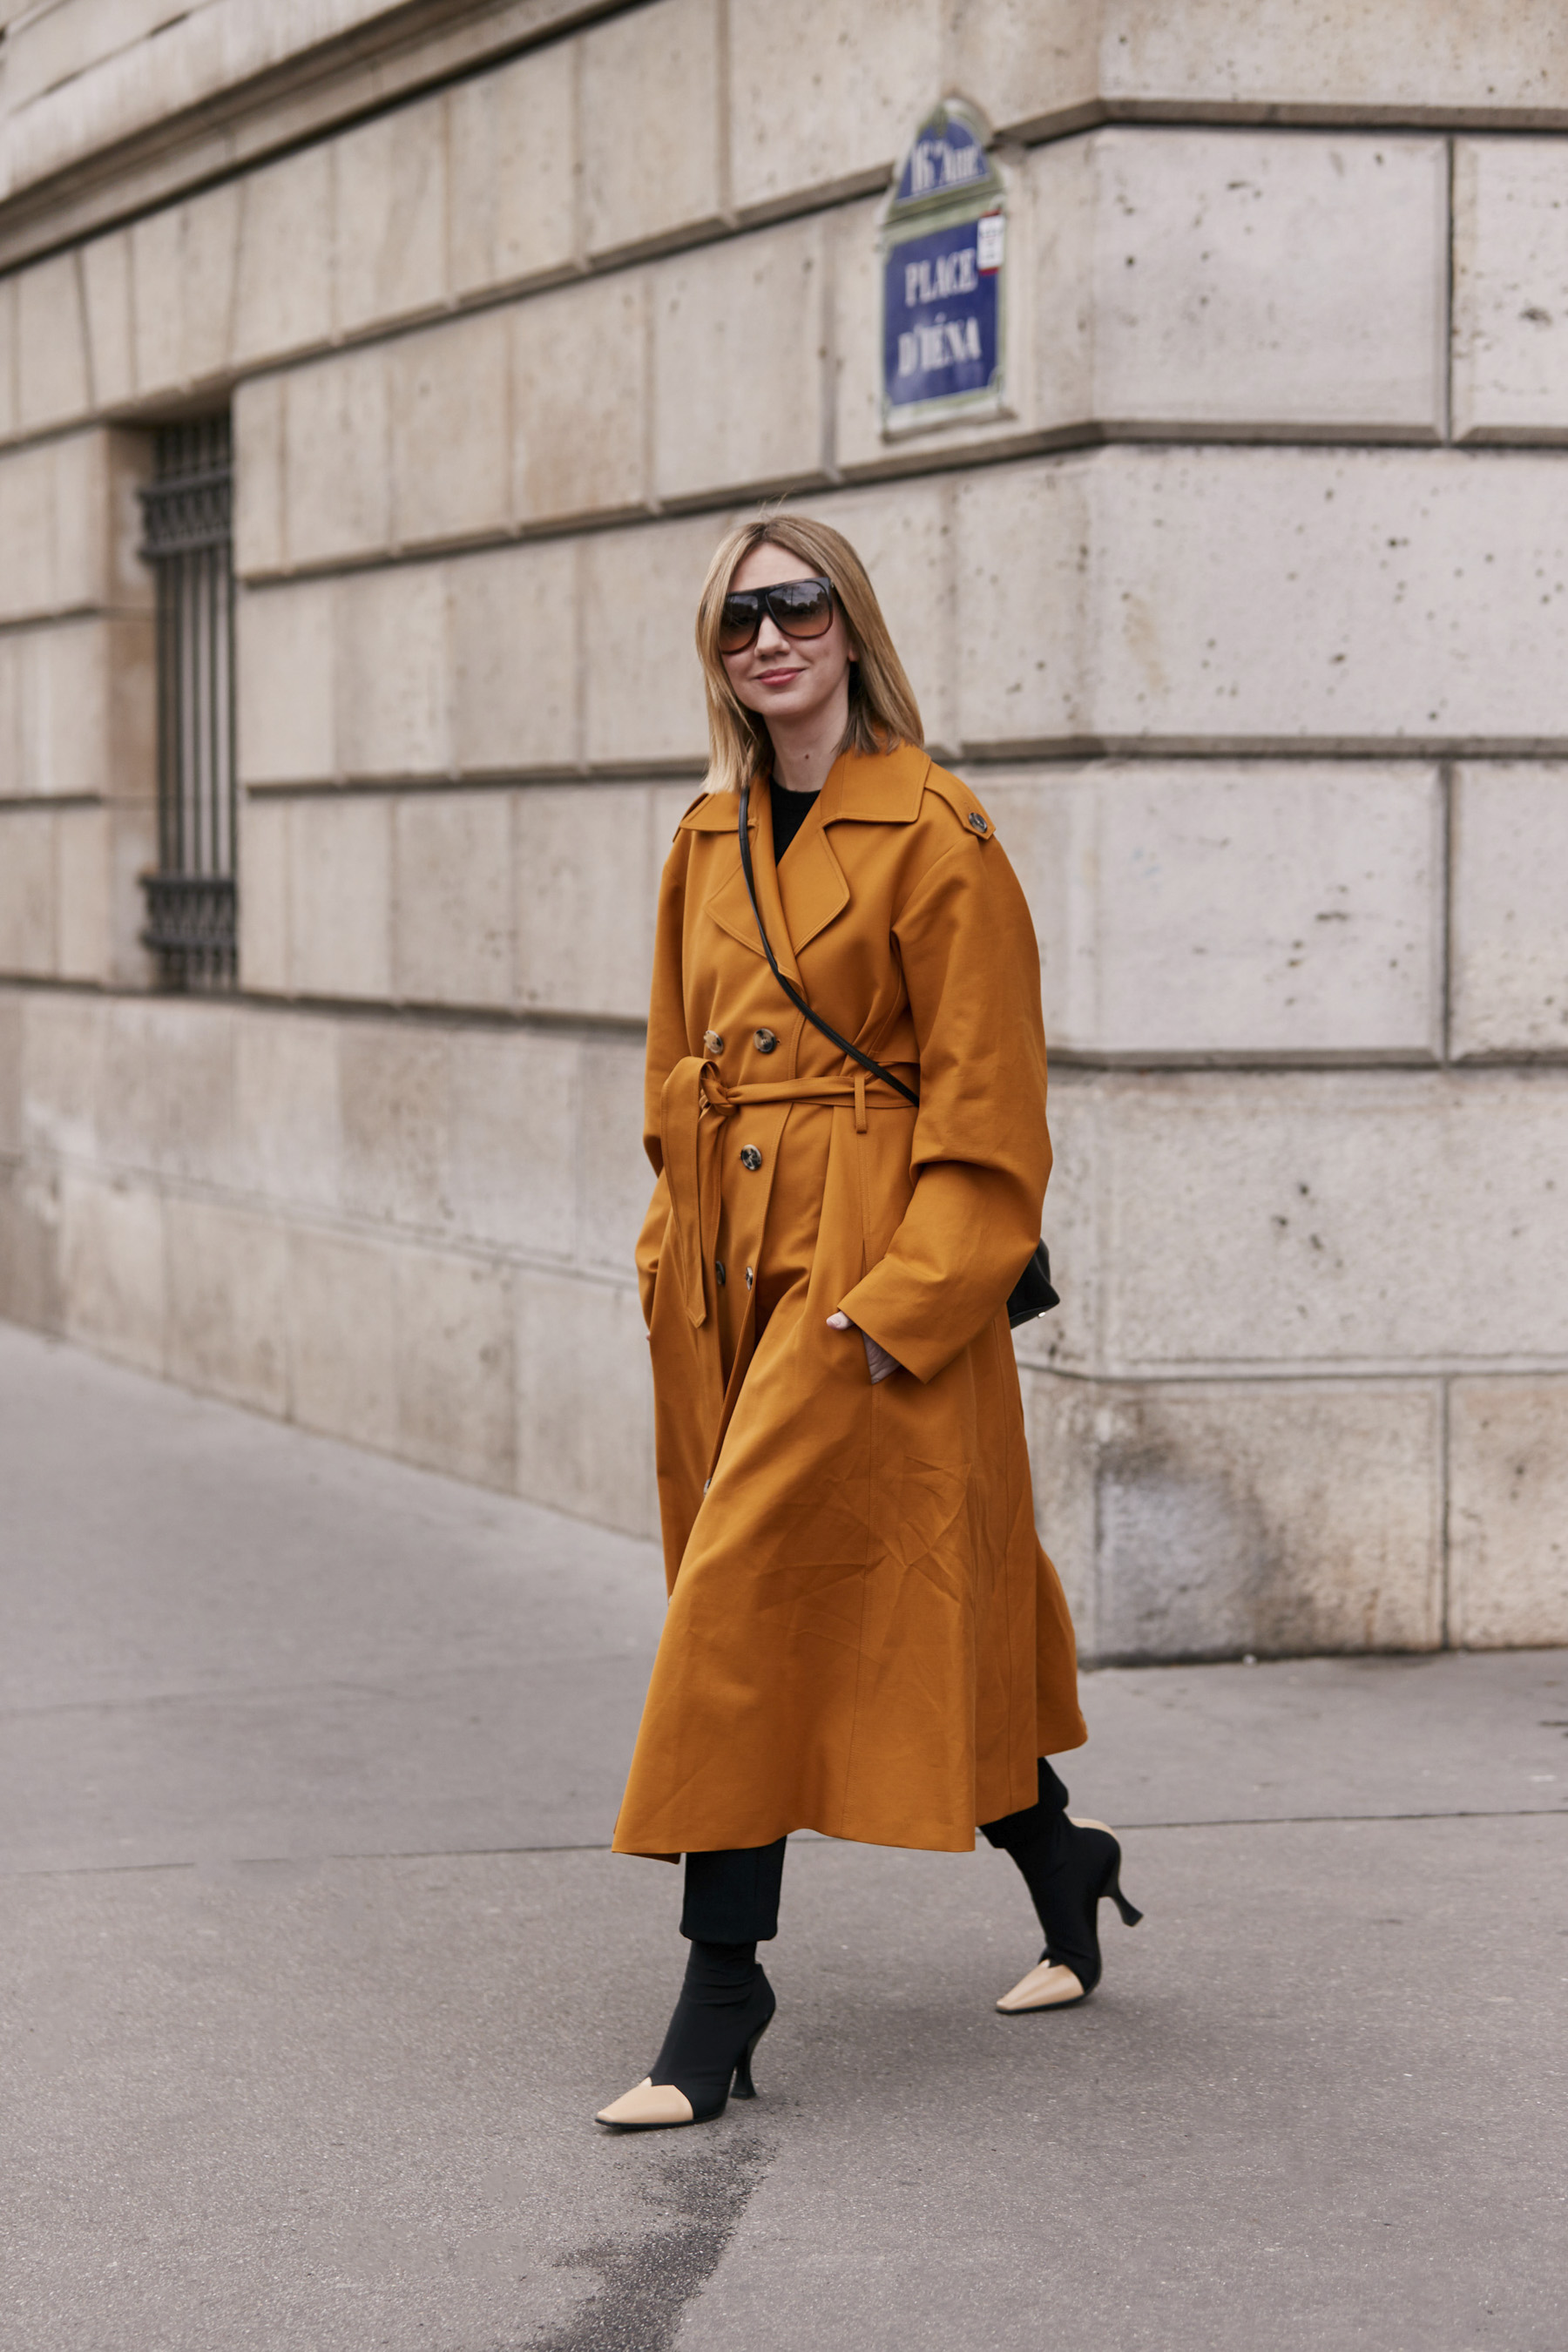 Paris Fashion Week Street Style More Fall 2019 Day 8 | The Impression